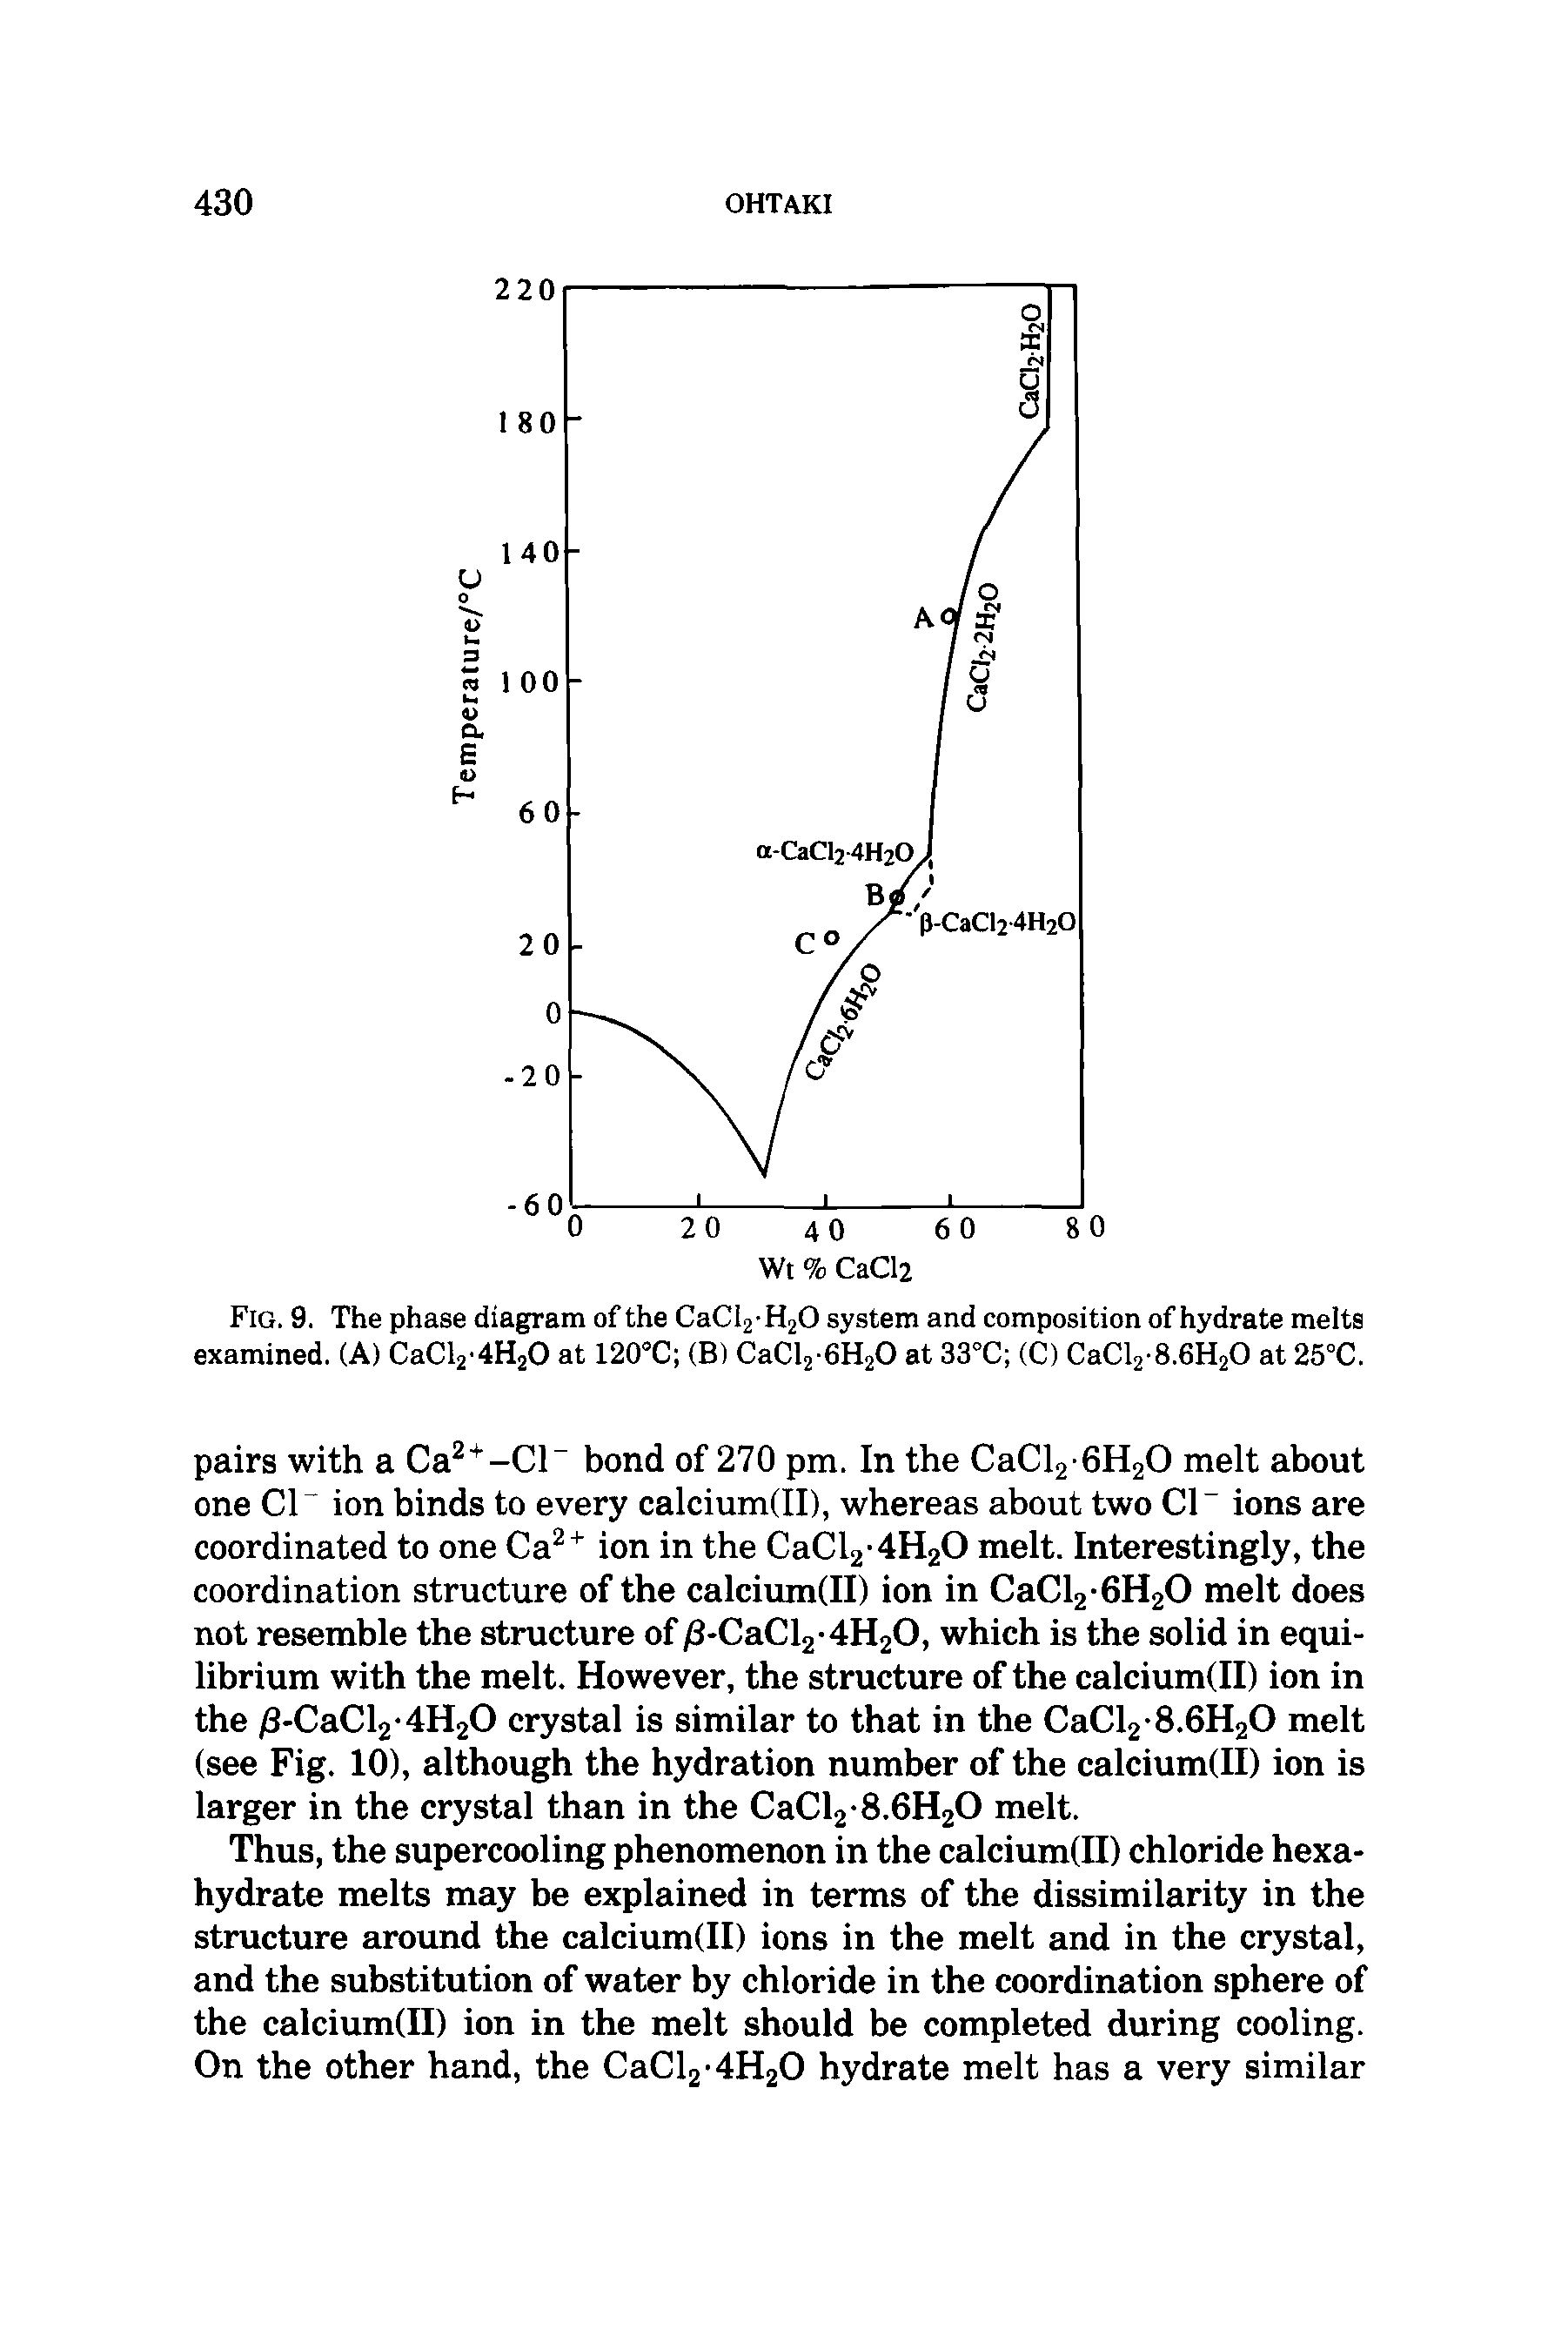 Fig. 9. The phase diagram of the CaCl2H20 system and composition of hydrate melts examined. (A) CaCl24H20 at 120°C (B) CaCl2-6H20 at 33°C (C) CaCl2-8.6H20 at 25°C.